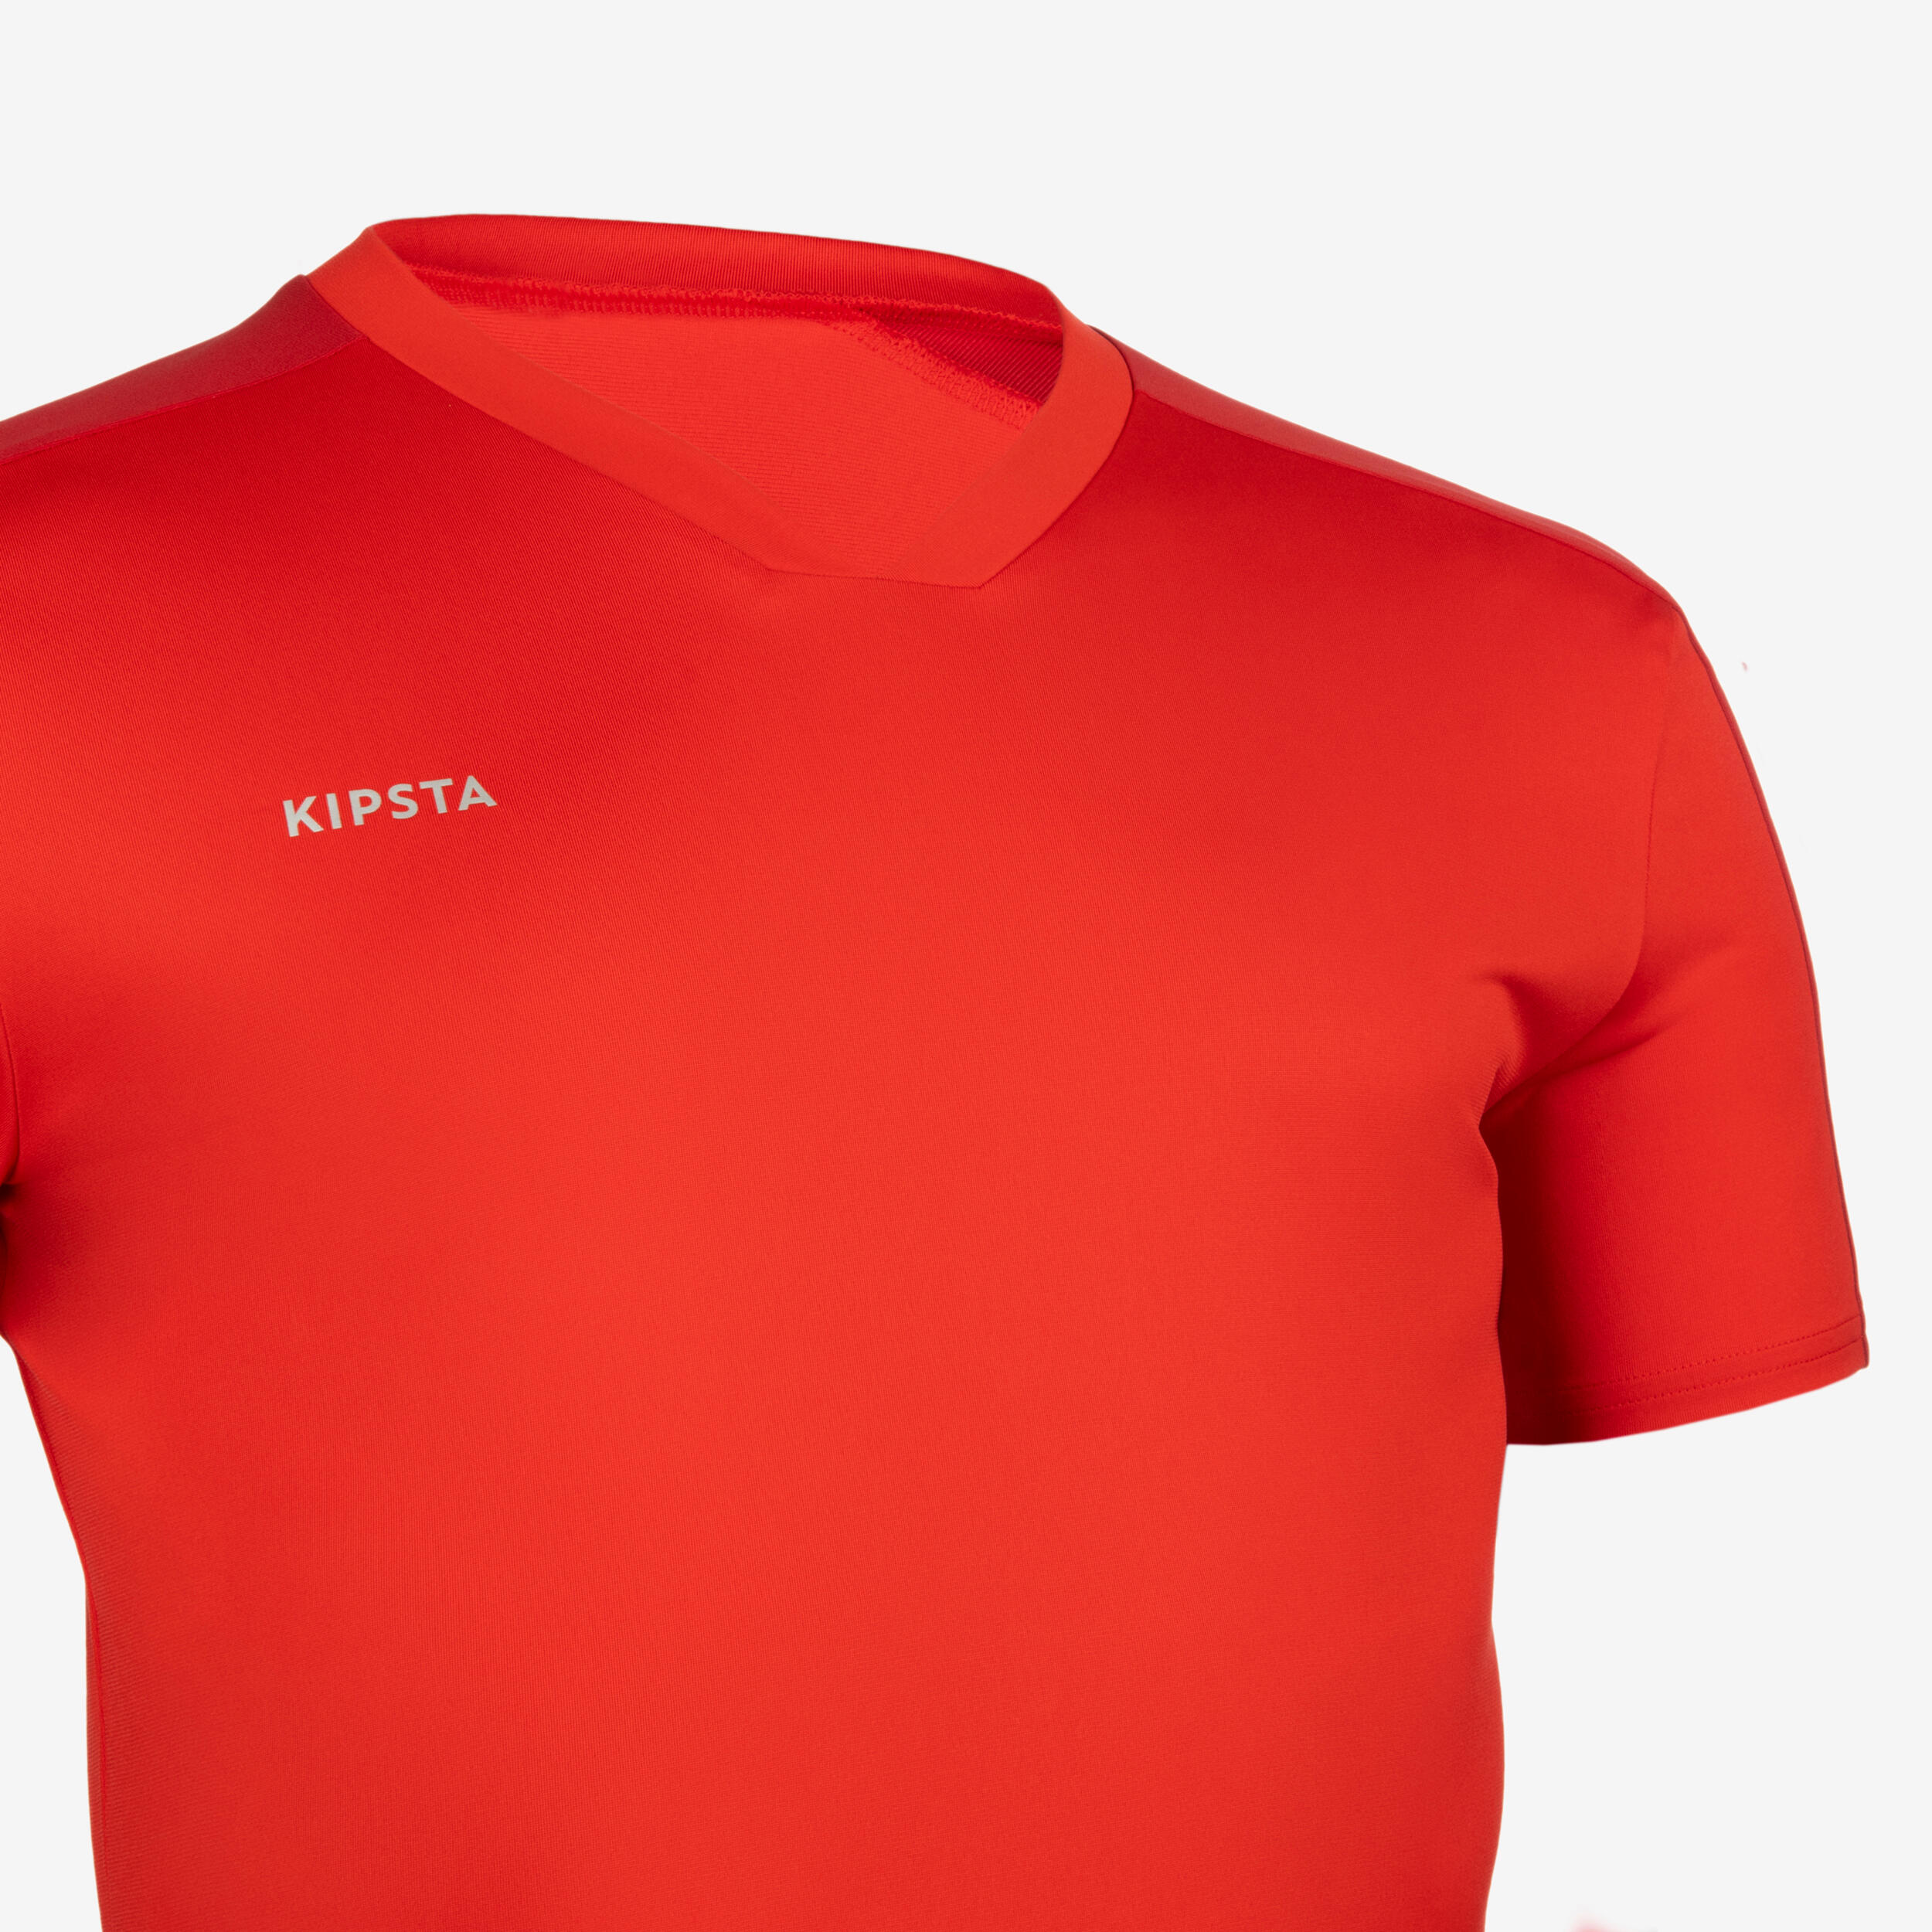 Adult Short-Sleeved Football Shirt Essential - Red 2/5